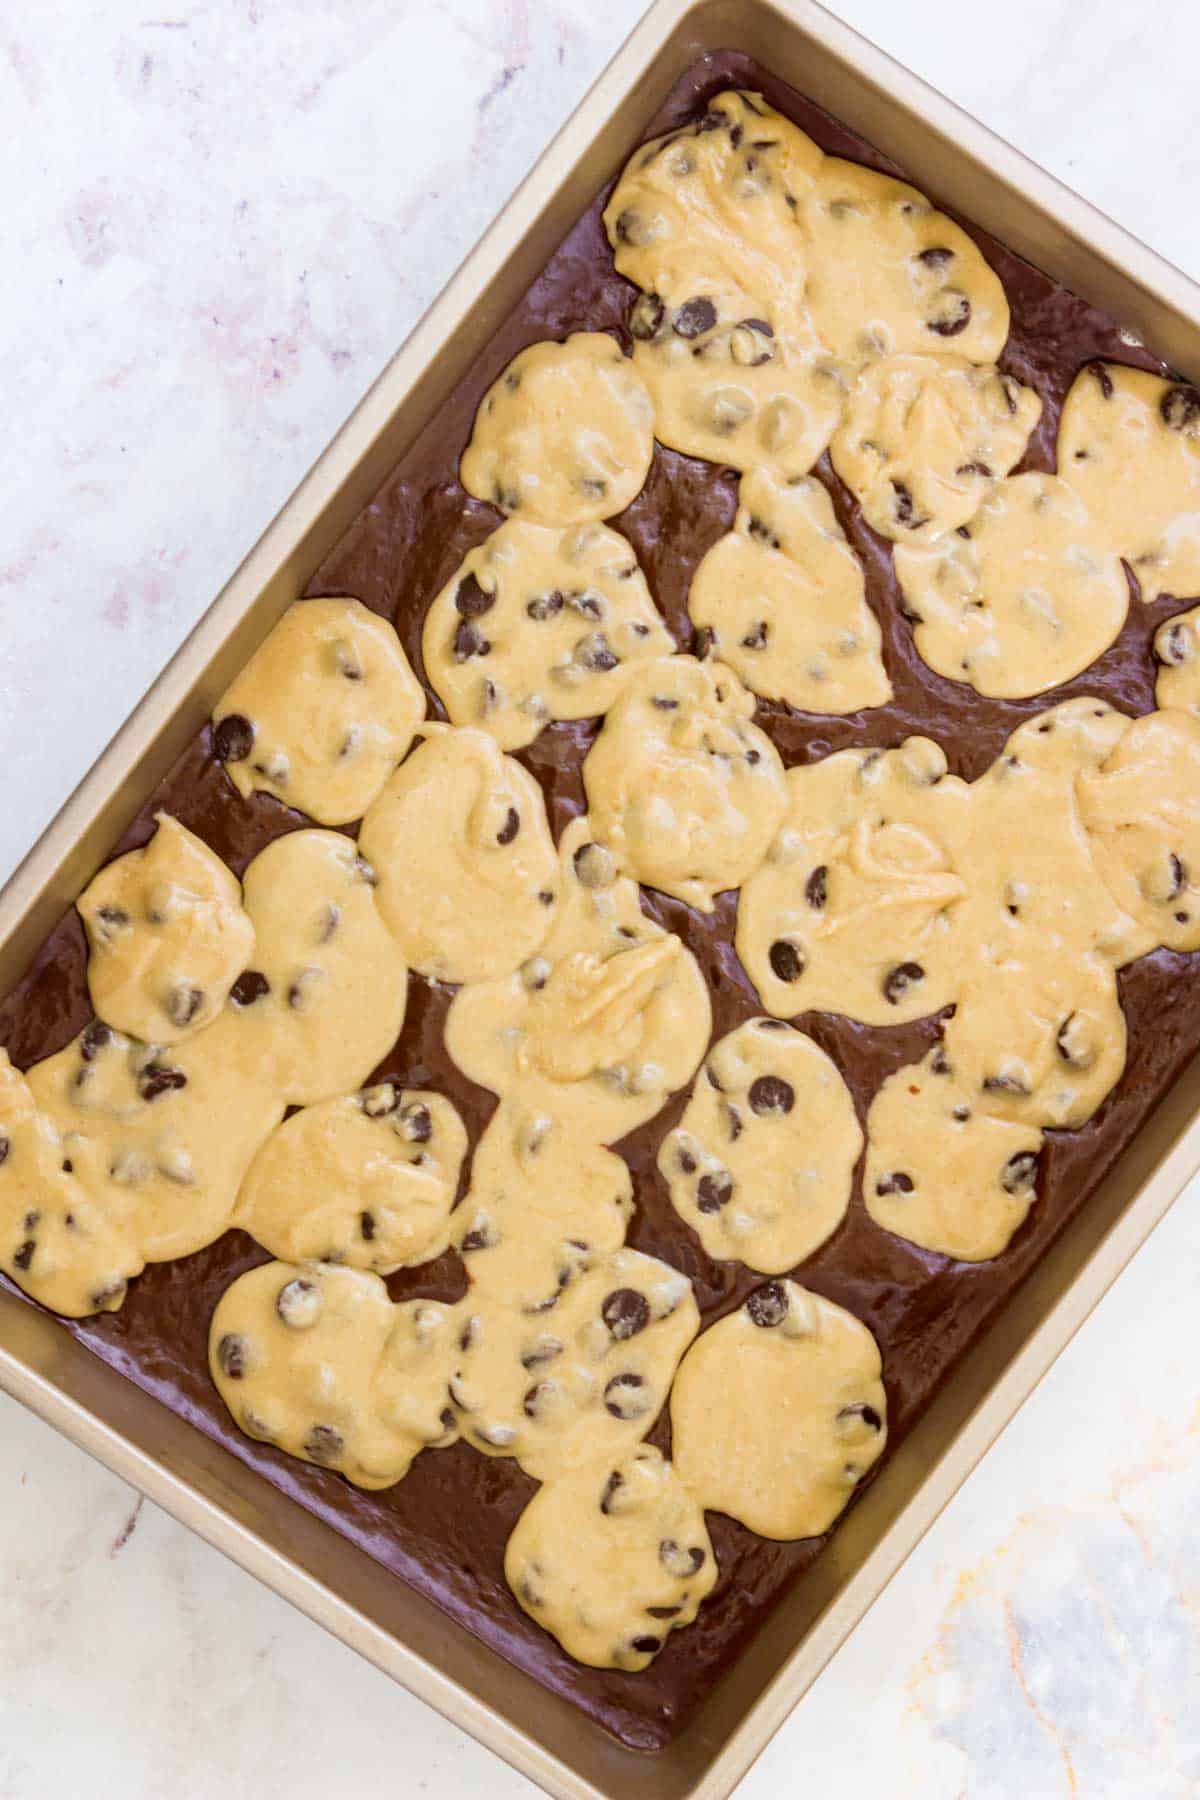 Cookie dough and brownie batter in a rectangular baking pan, ready to be baked.